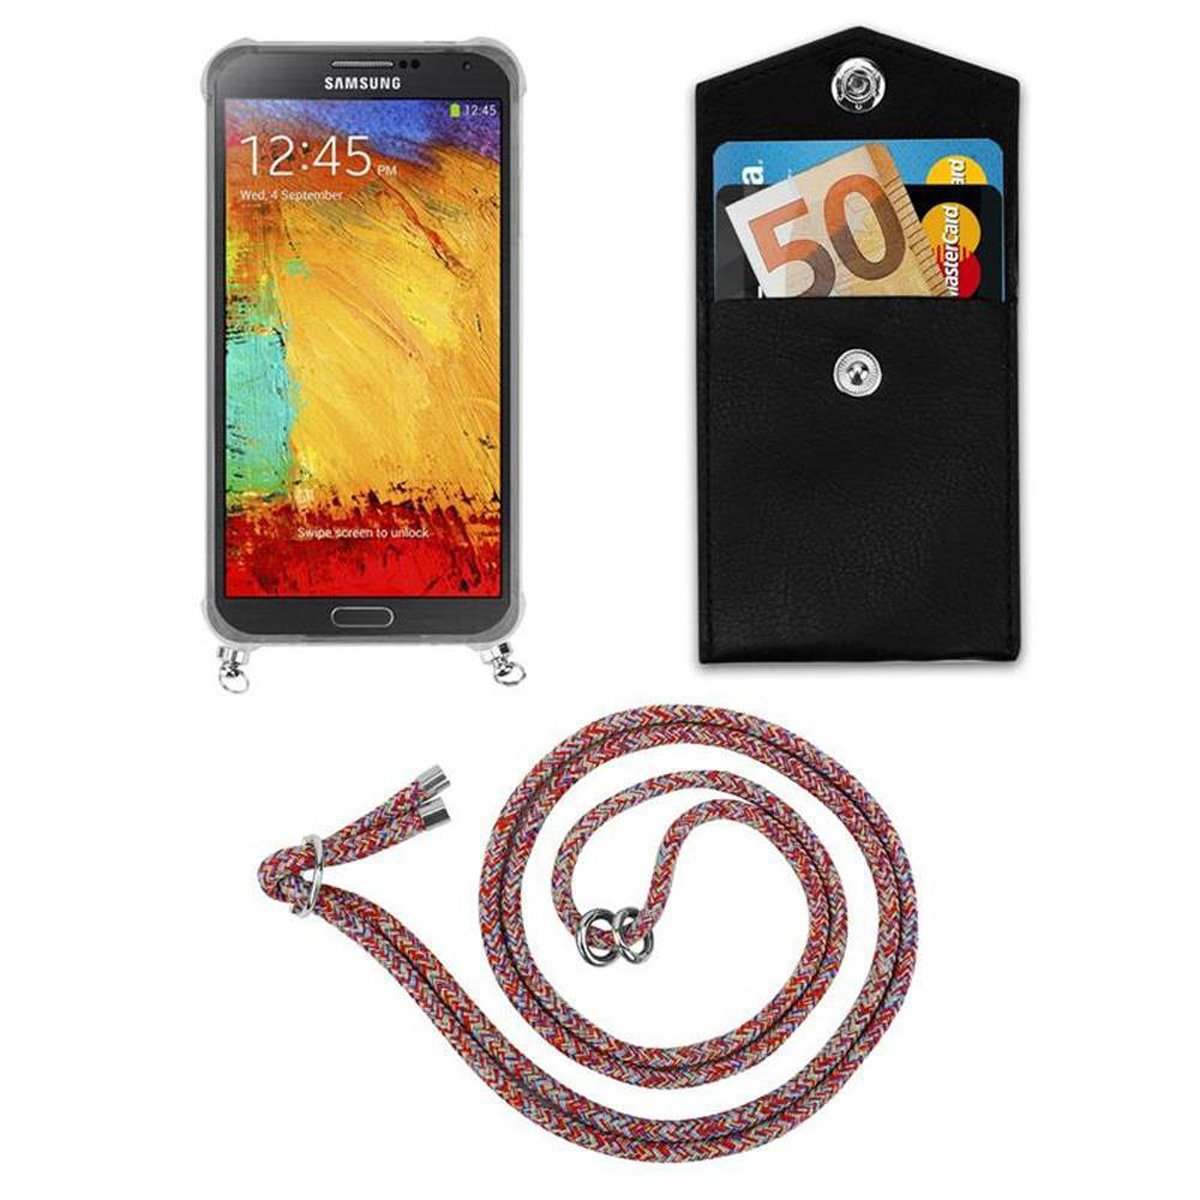 Galaxy und Handy abnehmbarer mit Ringen, Silber Kette Samsung, Hülle, Band COLORFUL NOTE Kordel PARROT Backcover, CADORABO 3,